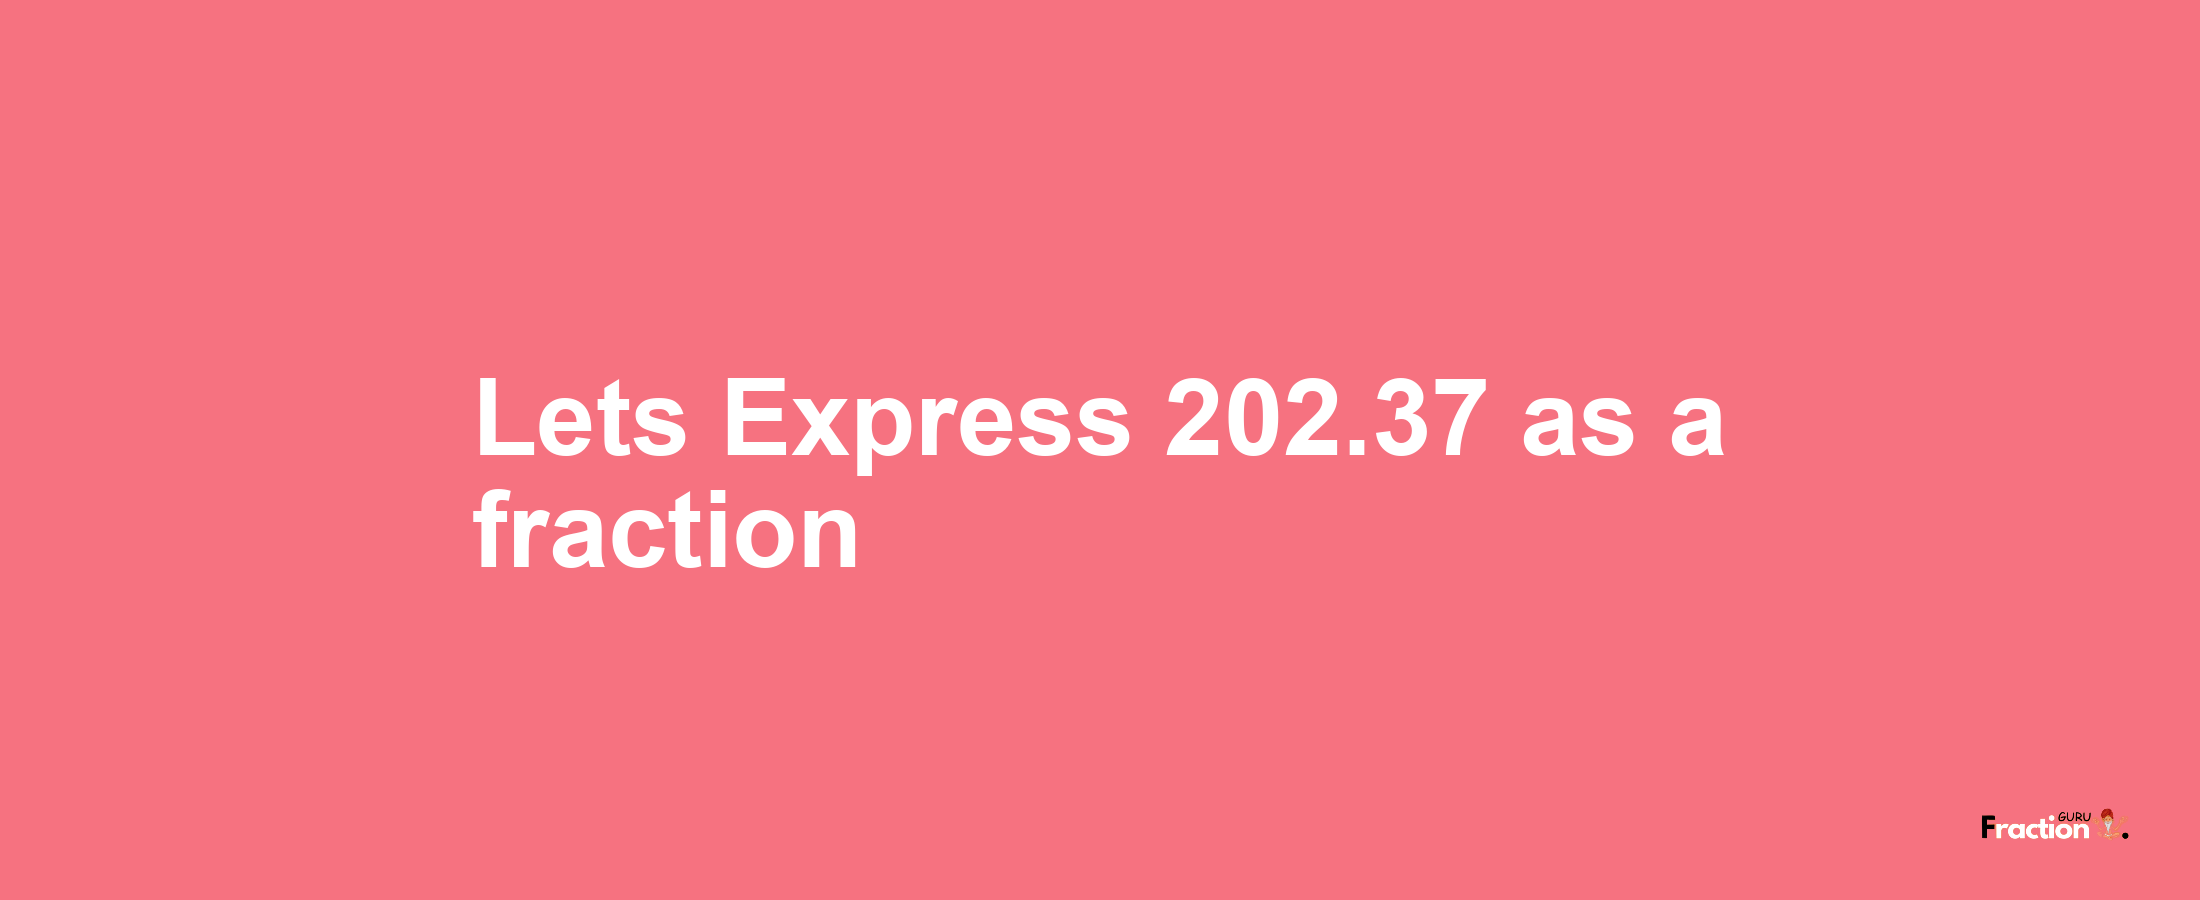 Lets Express 202.37 as afraction